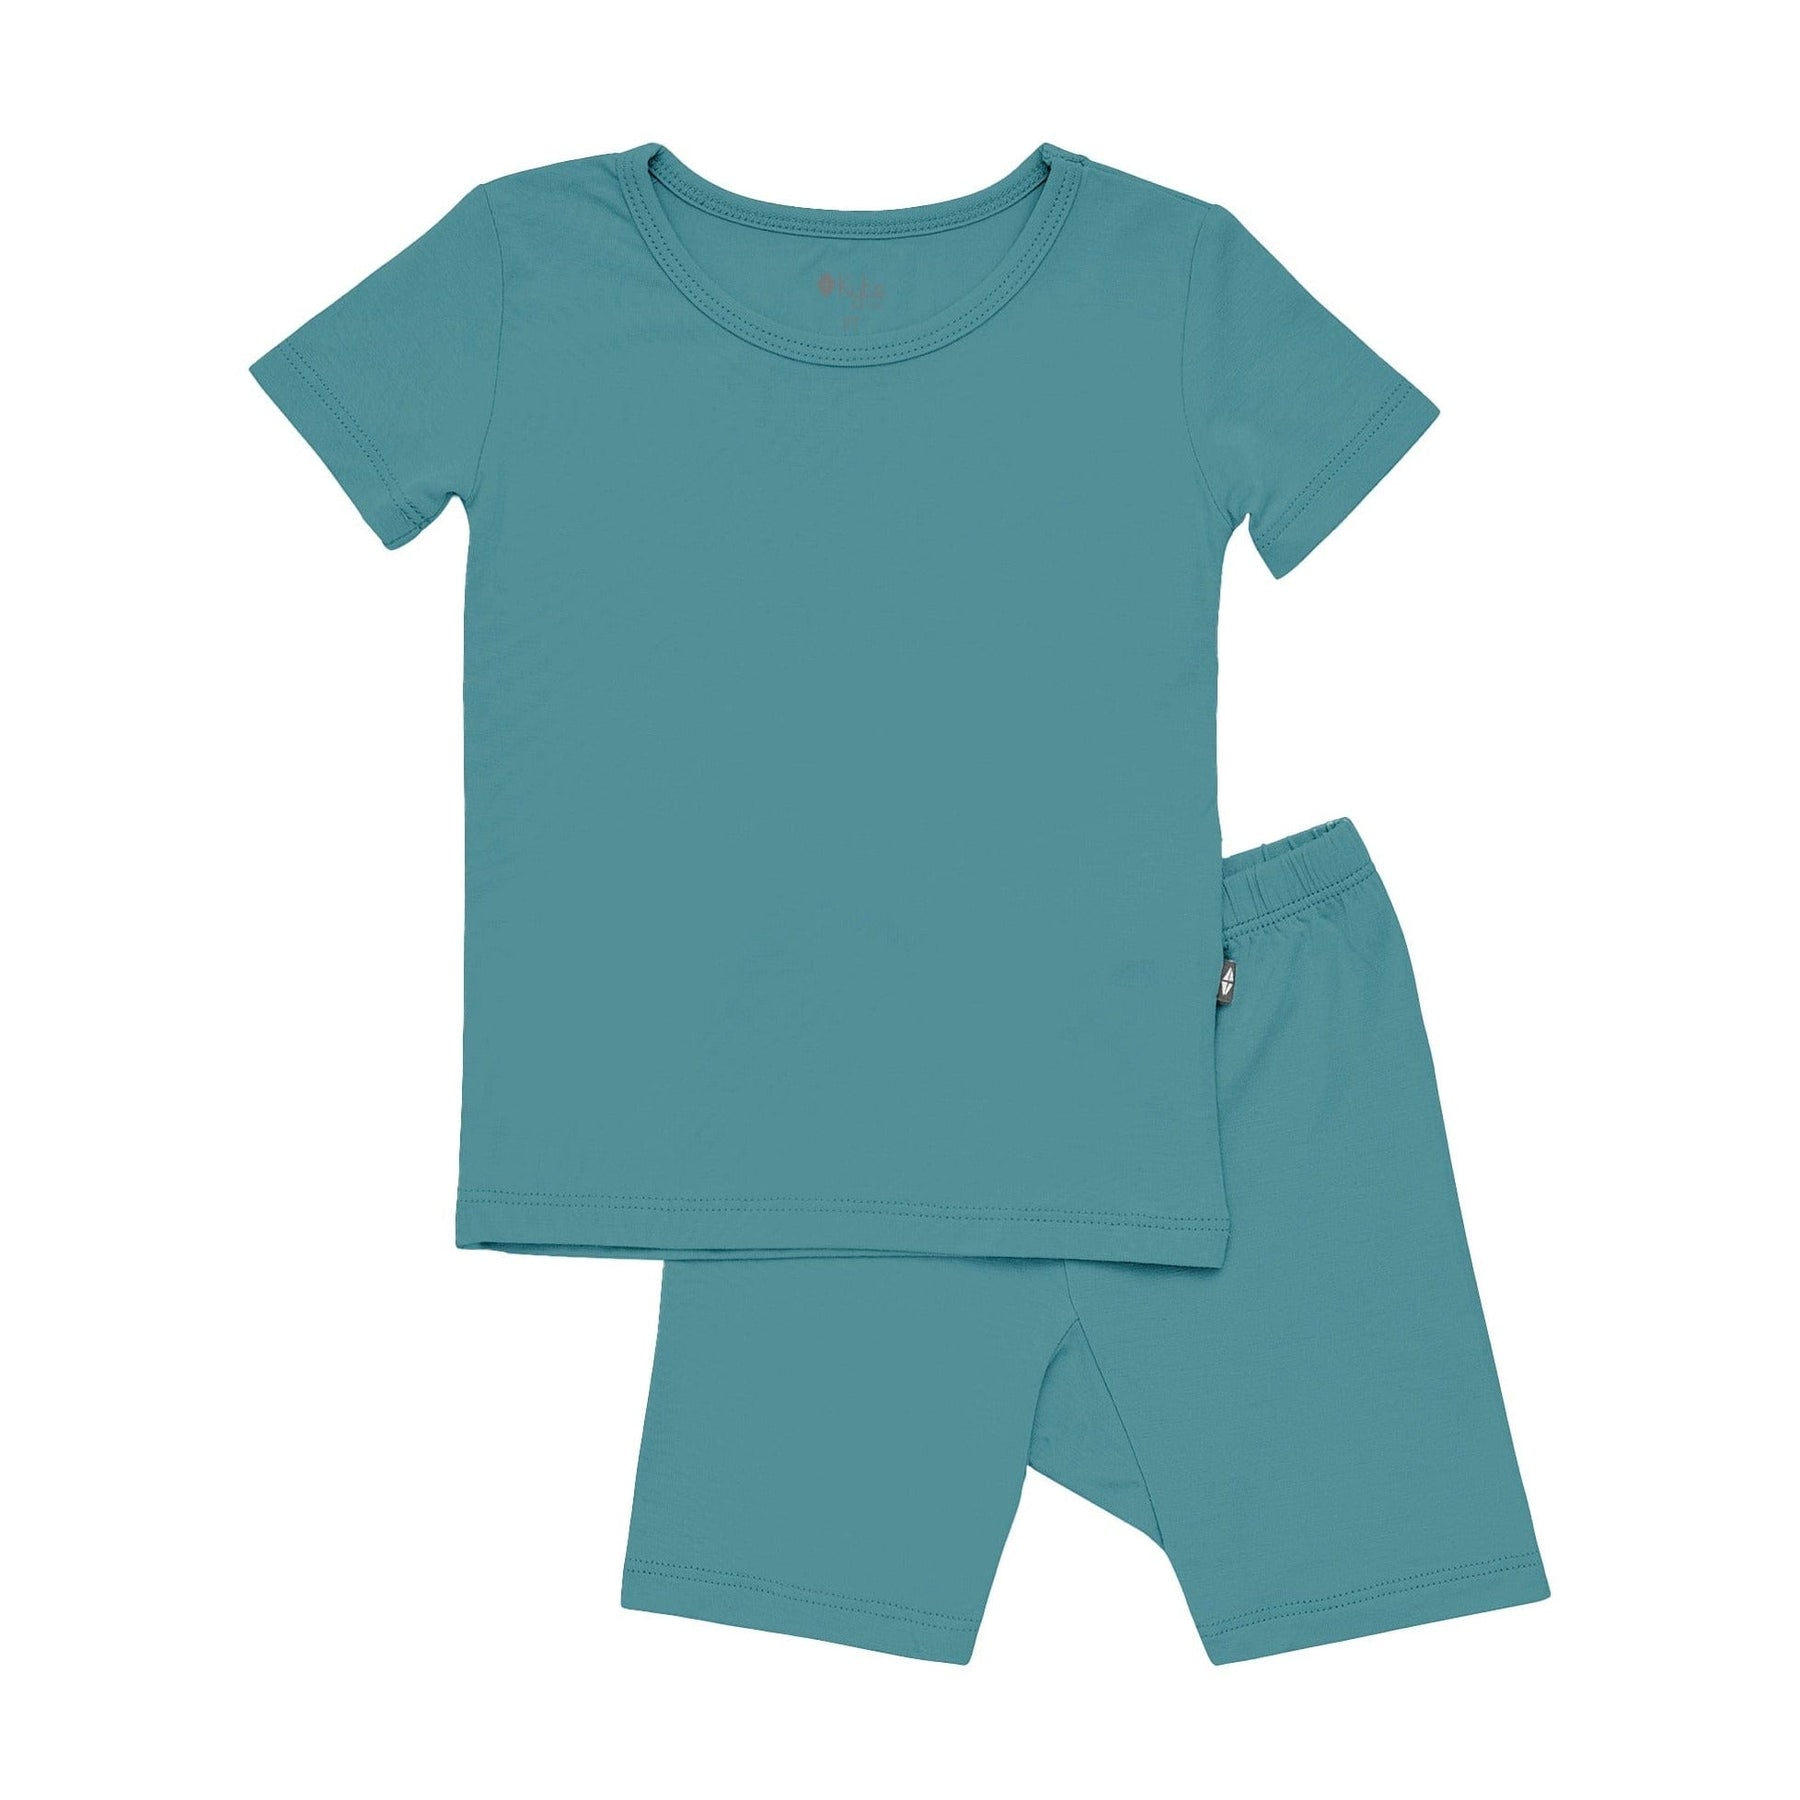 Kyte BABY Short Sleeve Toddler Pajama Set in Cove